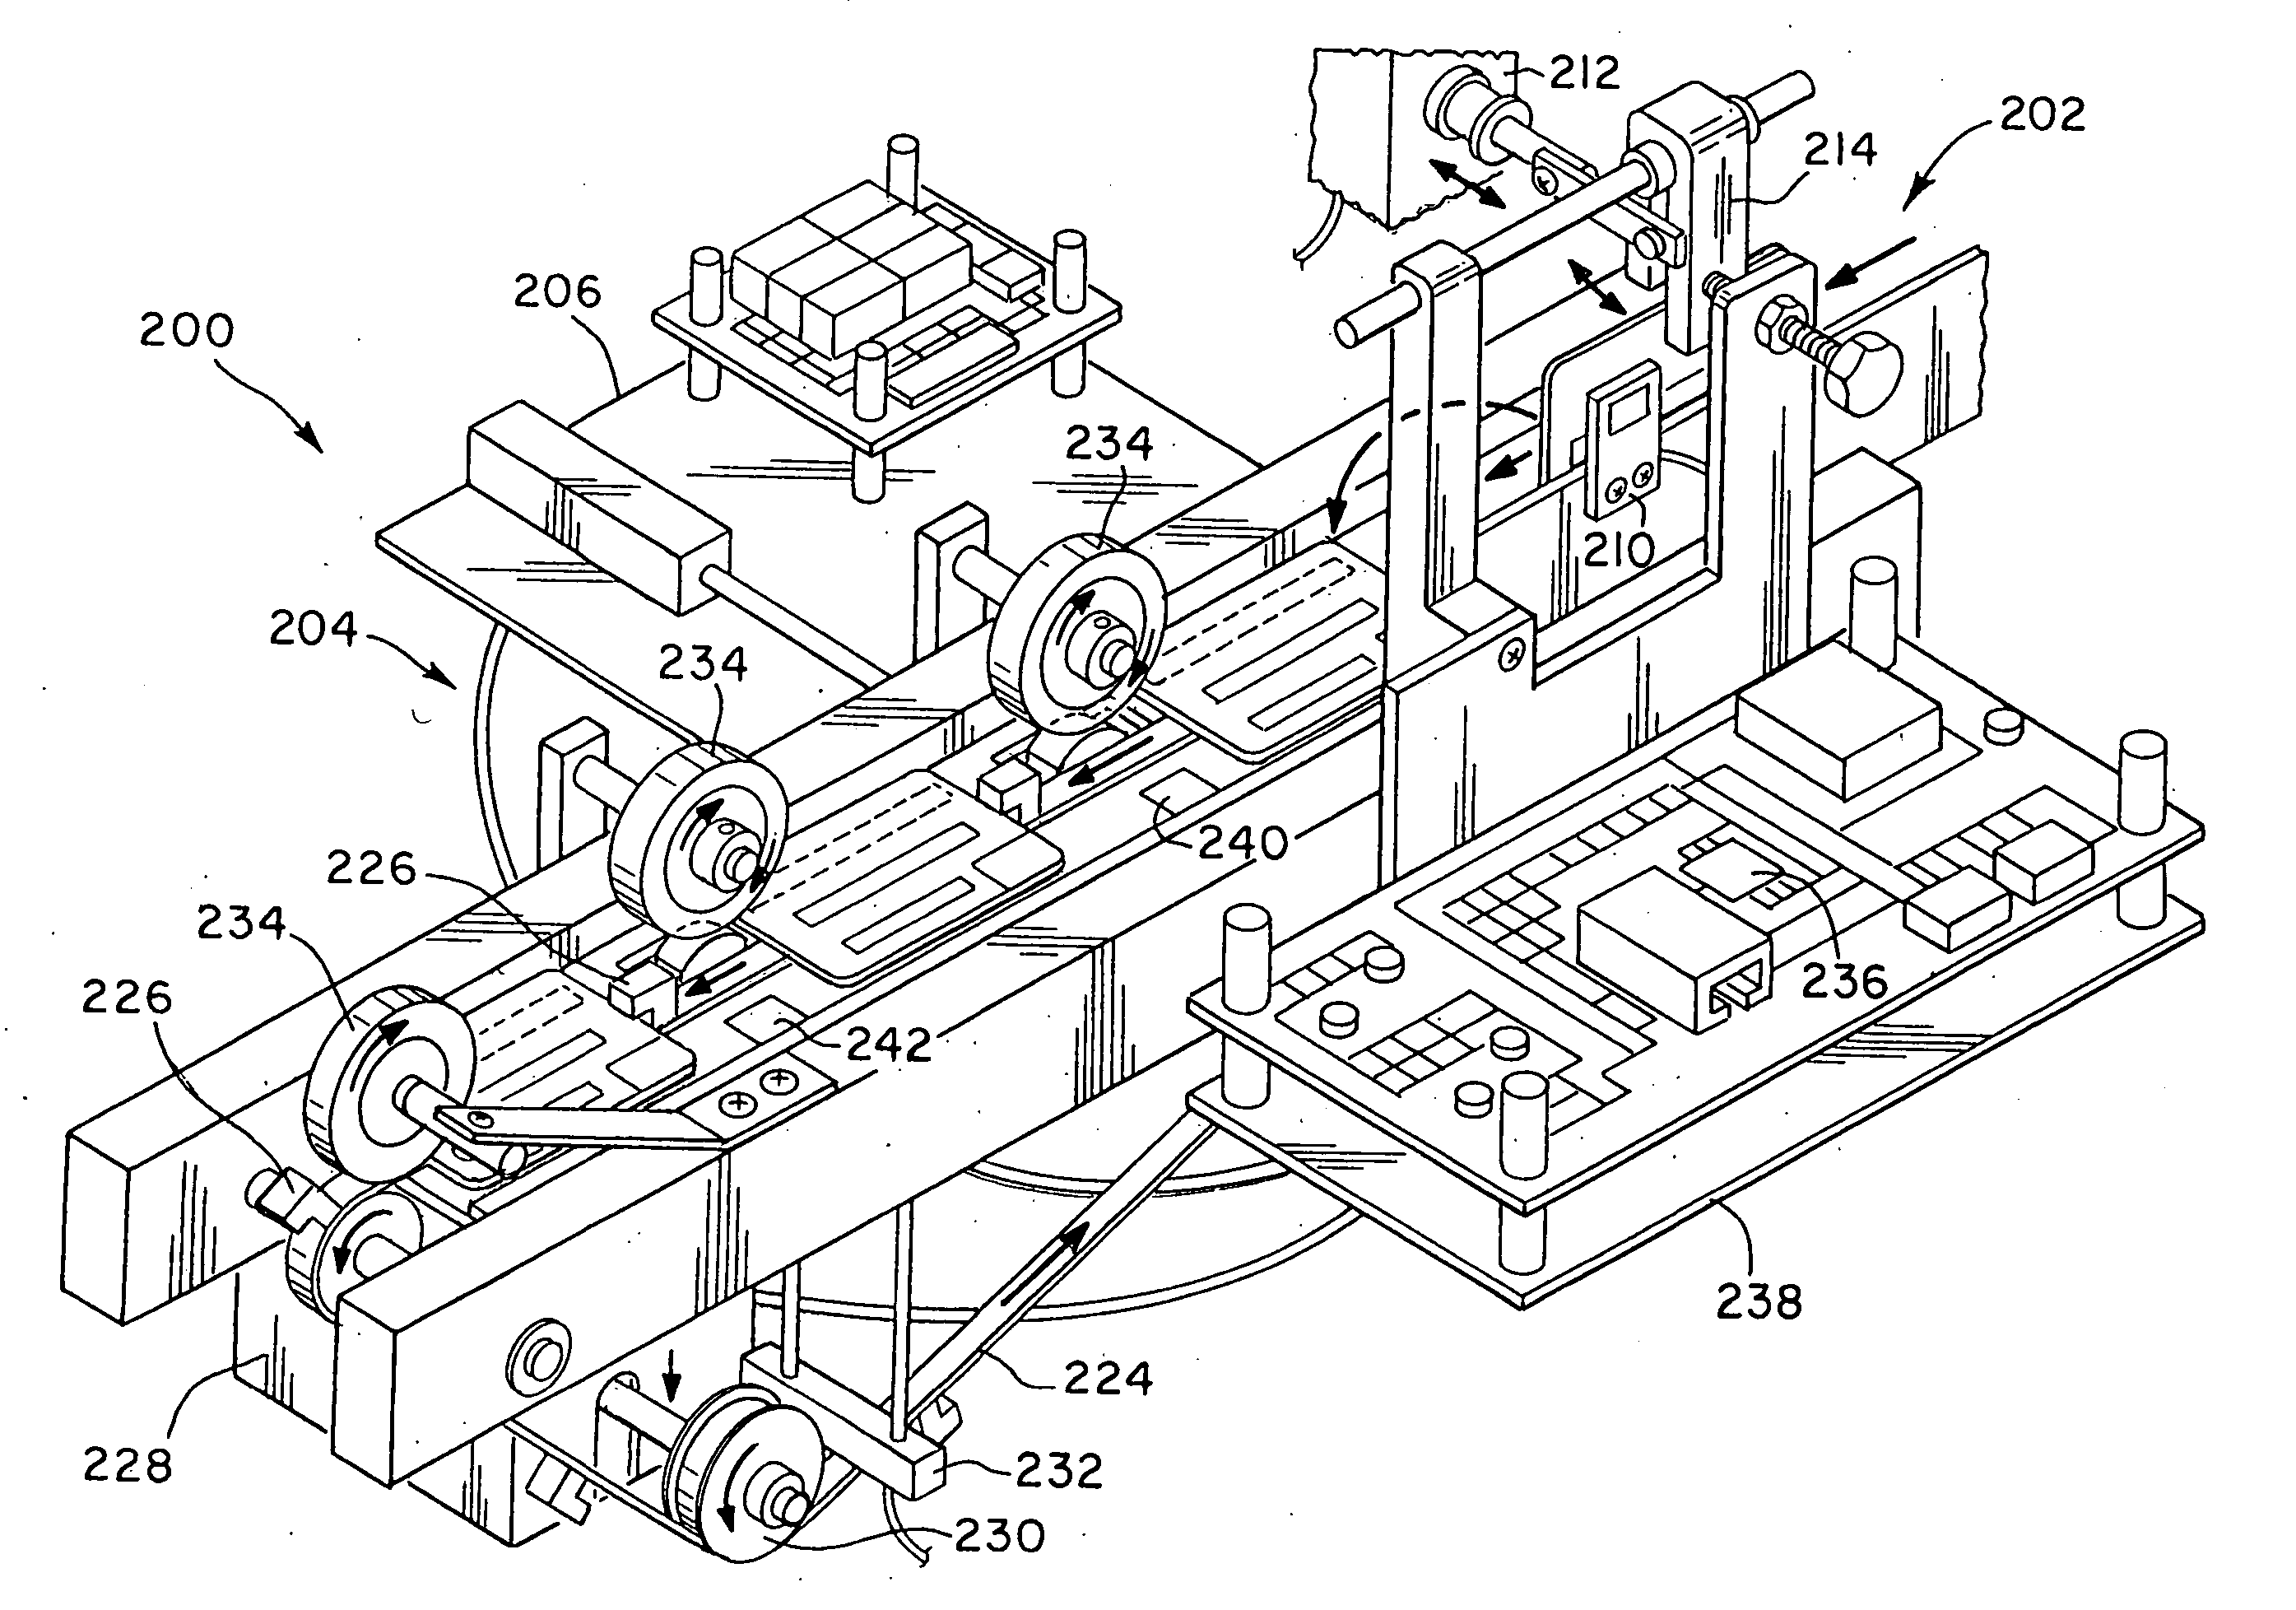 Card reading systems and methods